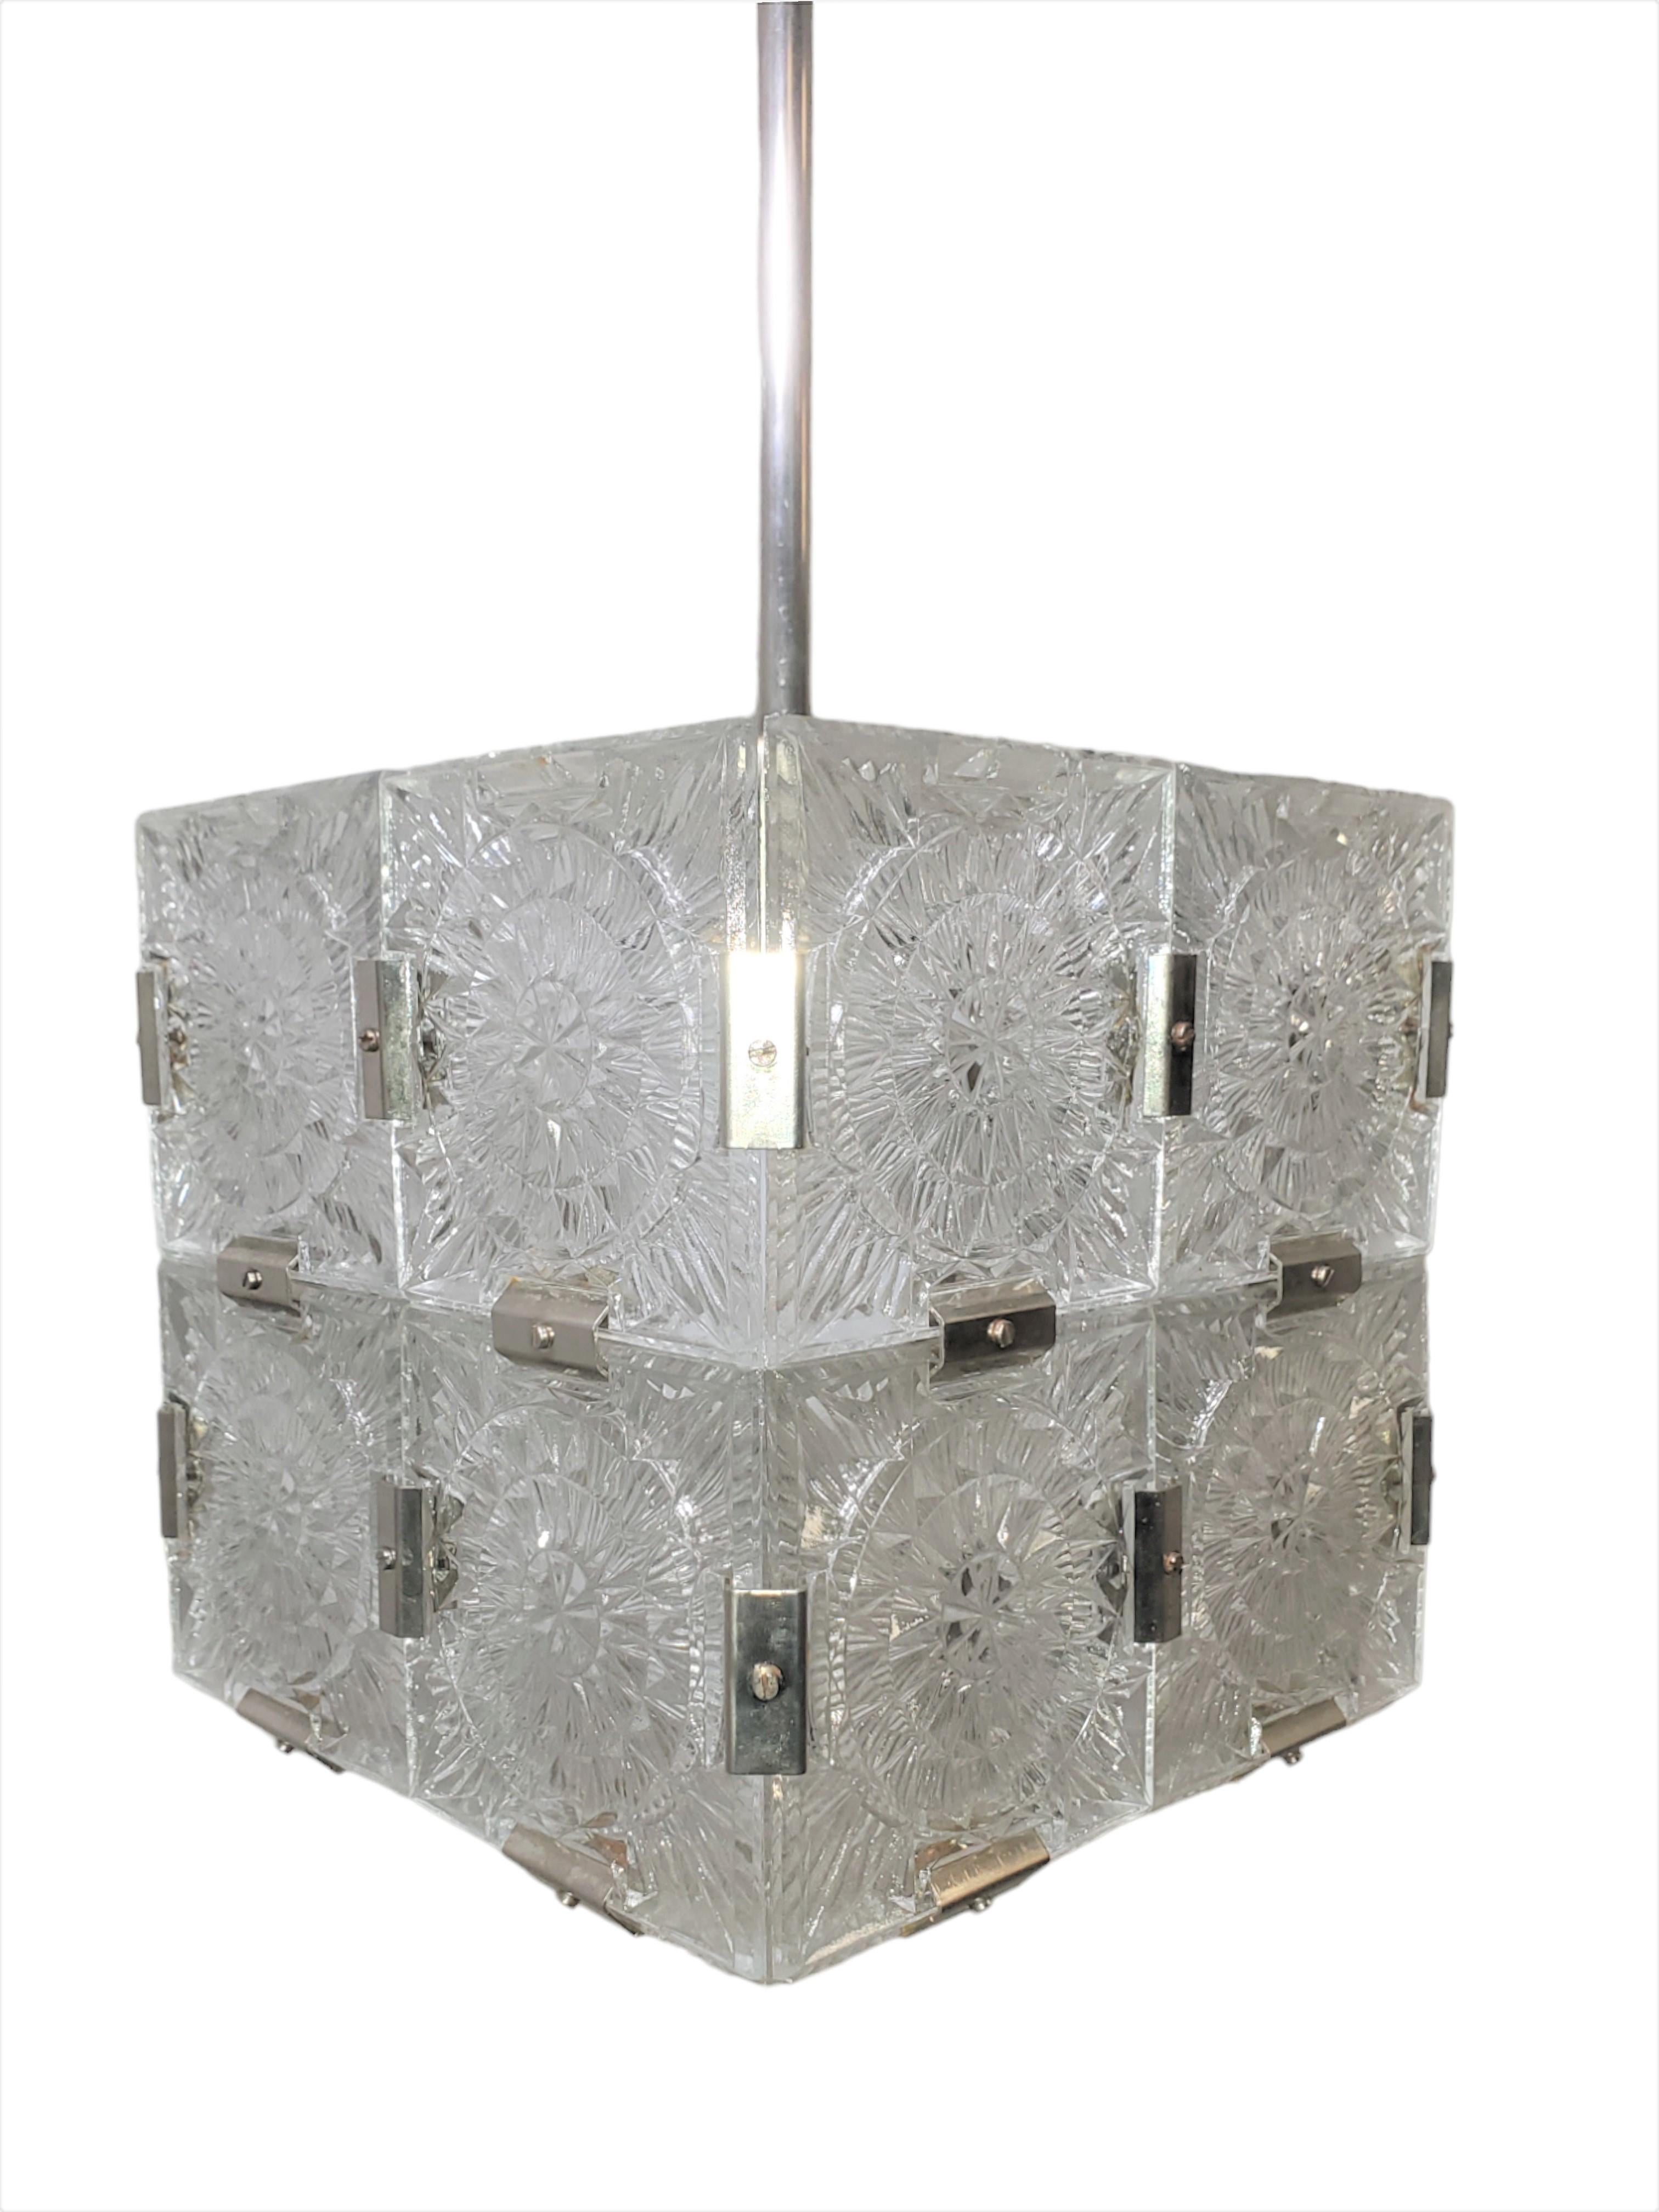 Set of Ten Original Box Cube Pendant Lights, Glass with Nickeled Clips In Good Condition For Sale In New York City, NY